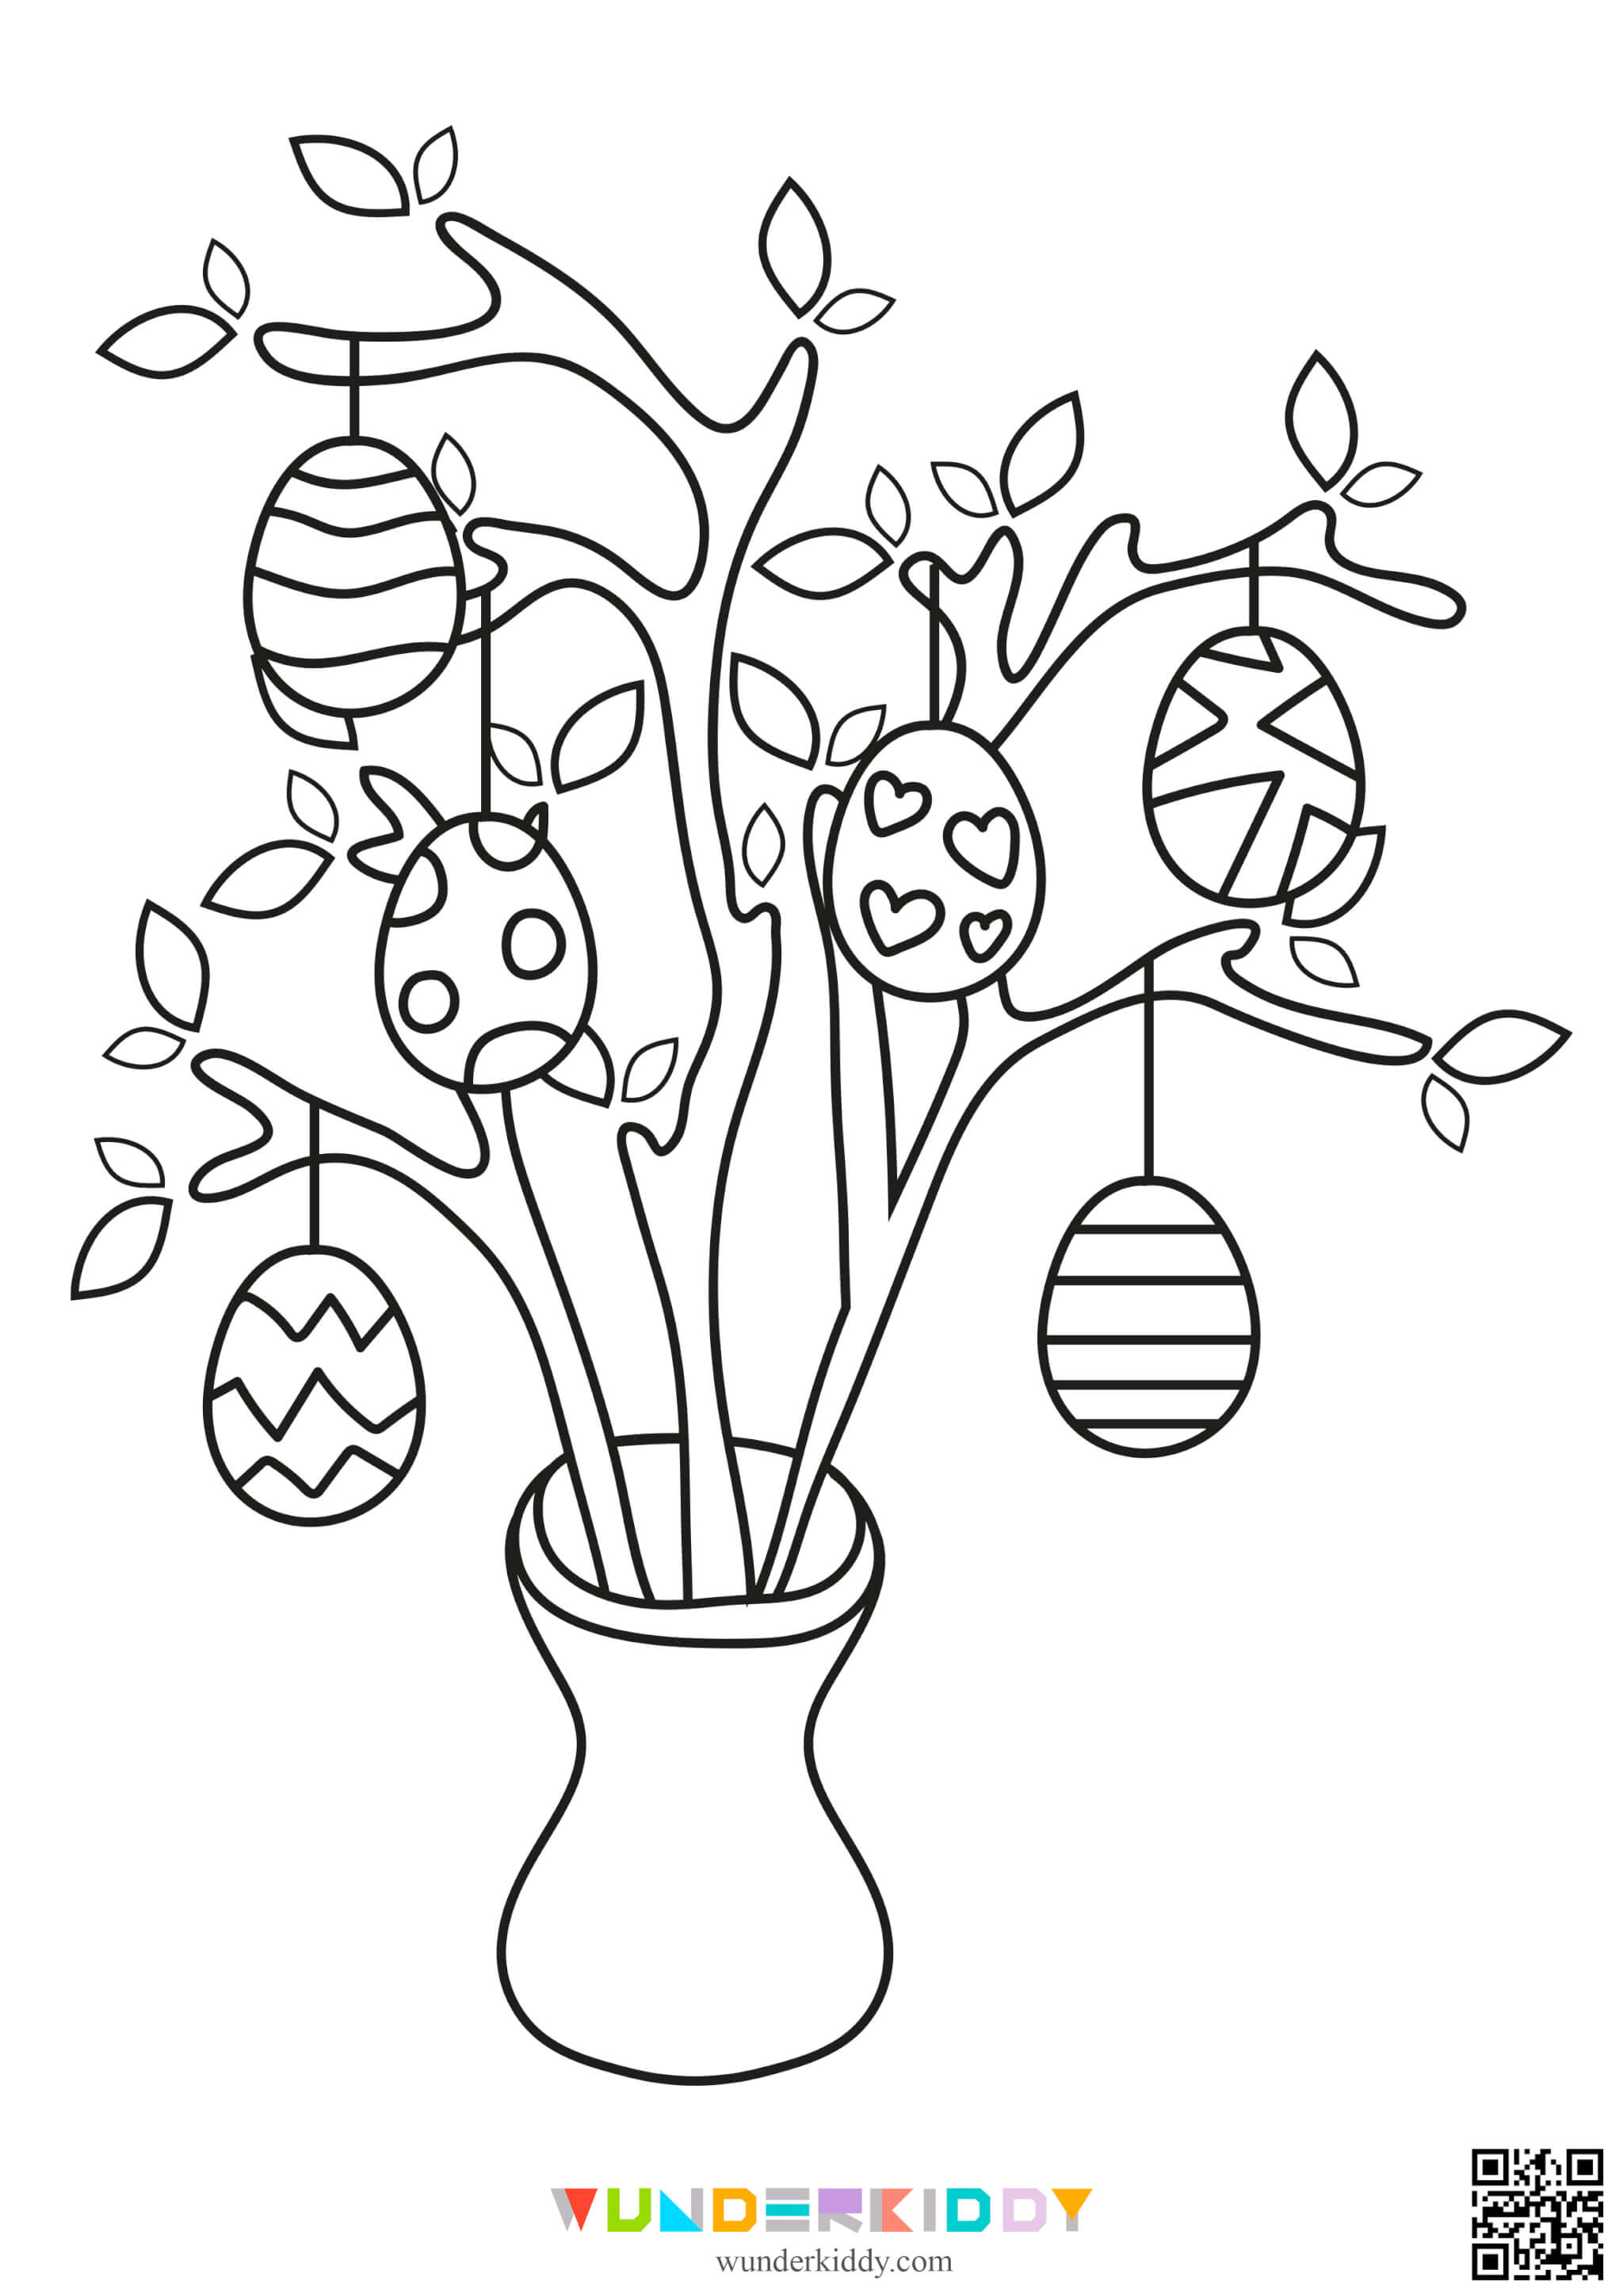 Easter Eggs Coloring Pages - Image 4